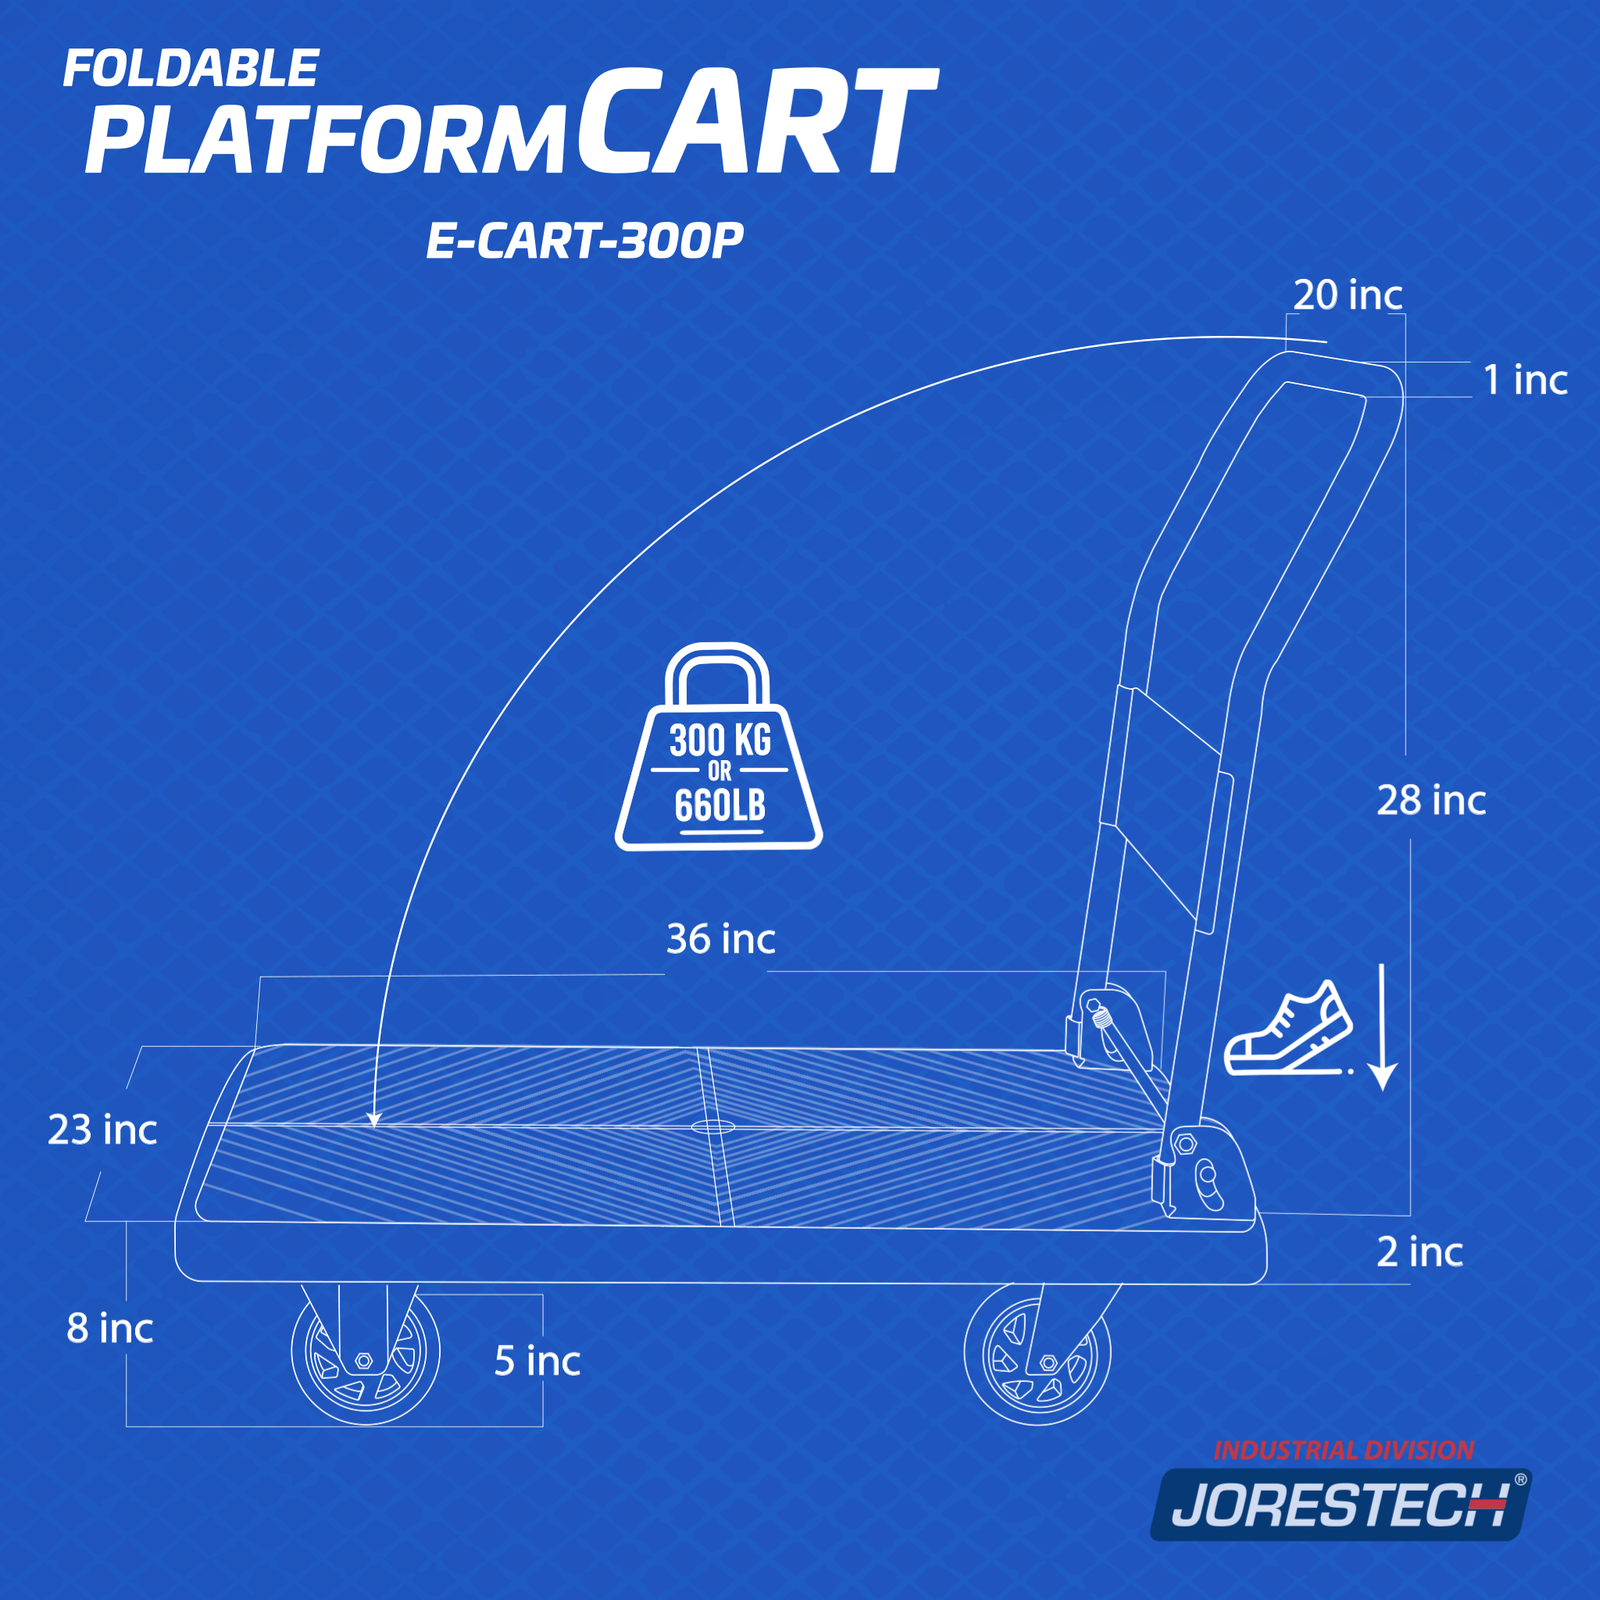 Graphic of the JORES TECHNOLOGIES® foldable platform cart showing the max weight the cart can handle which is 300KG or 660LB and also measurements of  the platform of the dolly cart: 36inch x 23 inch